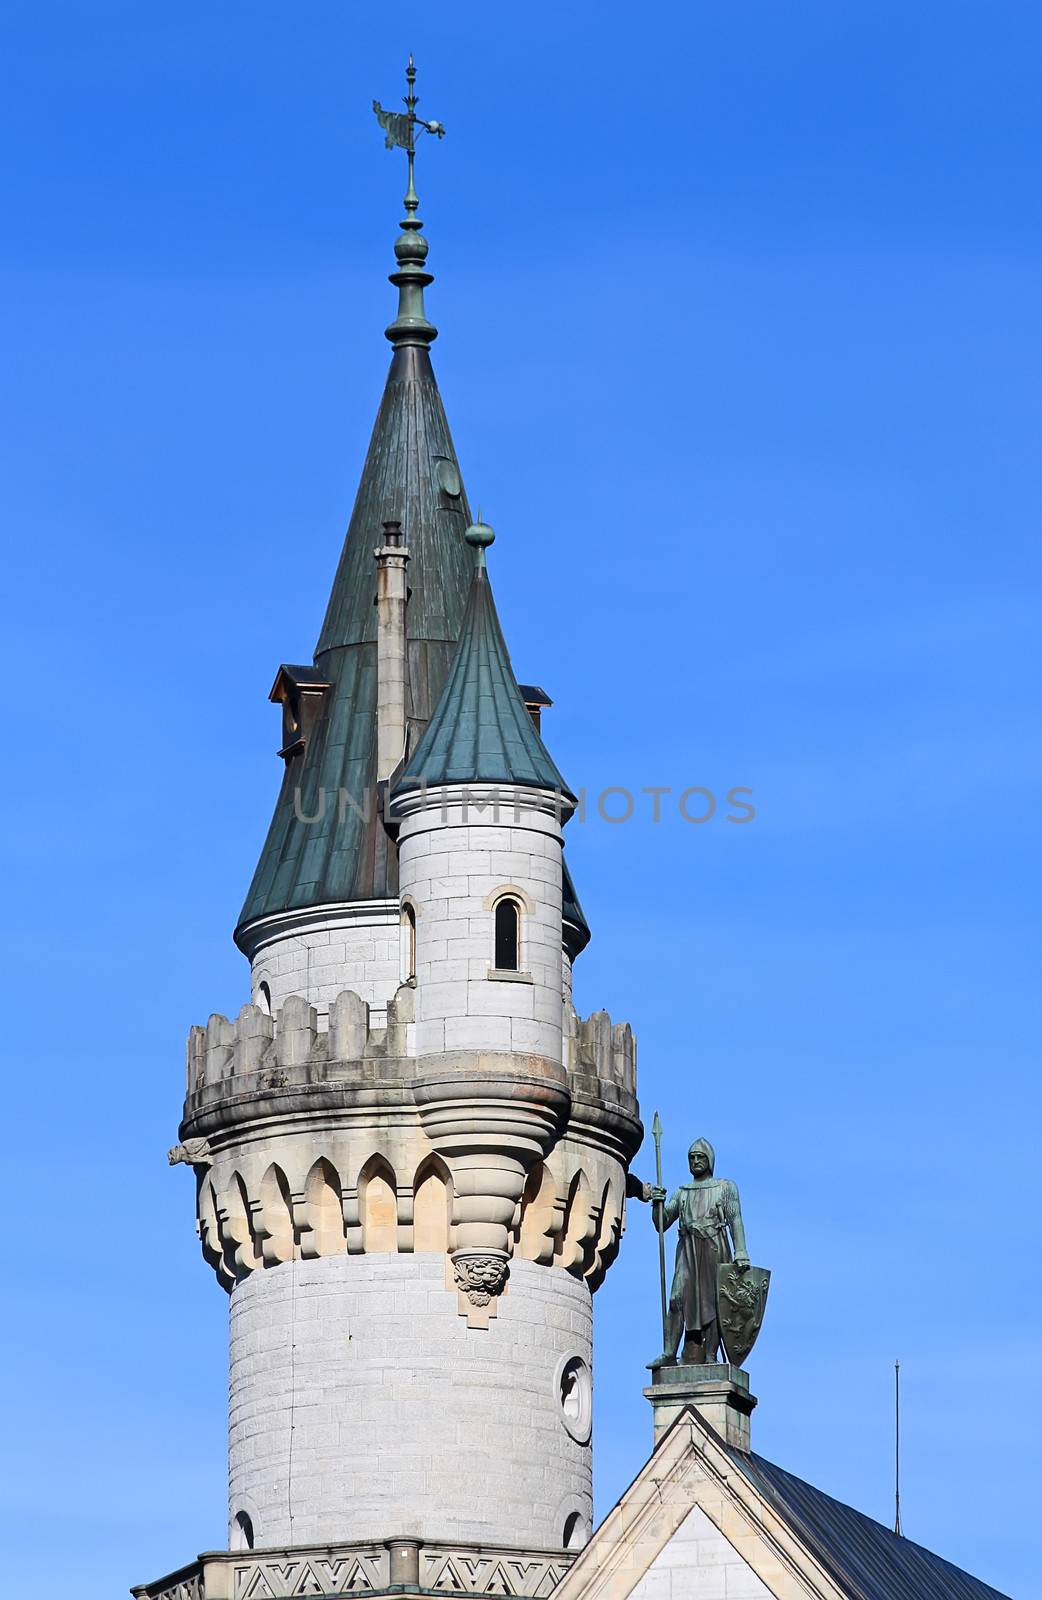 Elements of decoration of the Neuschwanstein castle in Bavarian alps, Germany